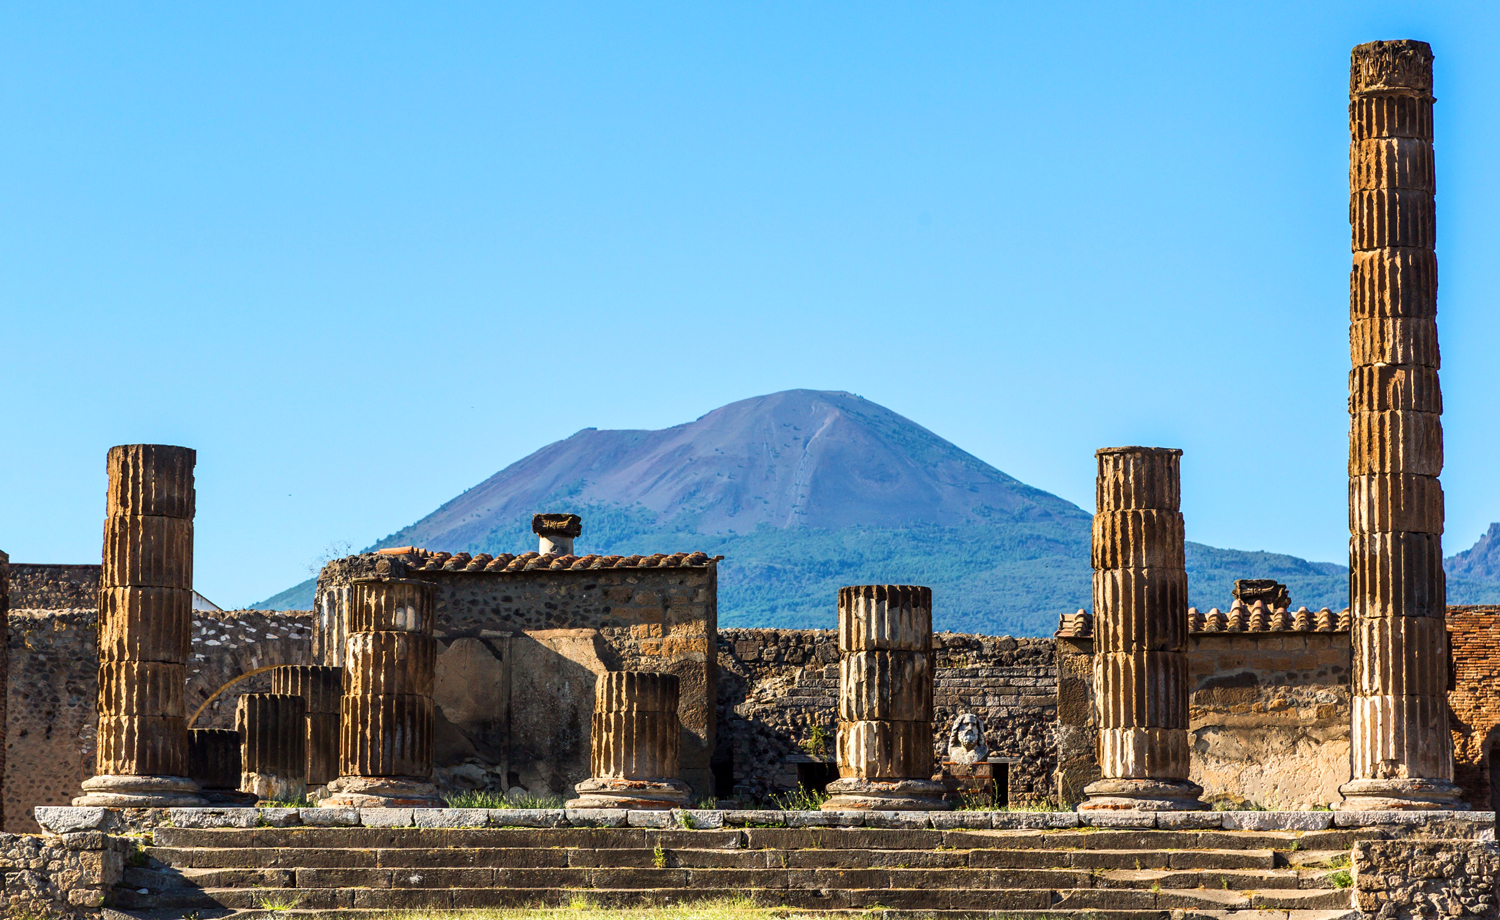 Pompeii VIP: SHARED SMALL GROUP TOUR with Your Archaeologist